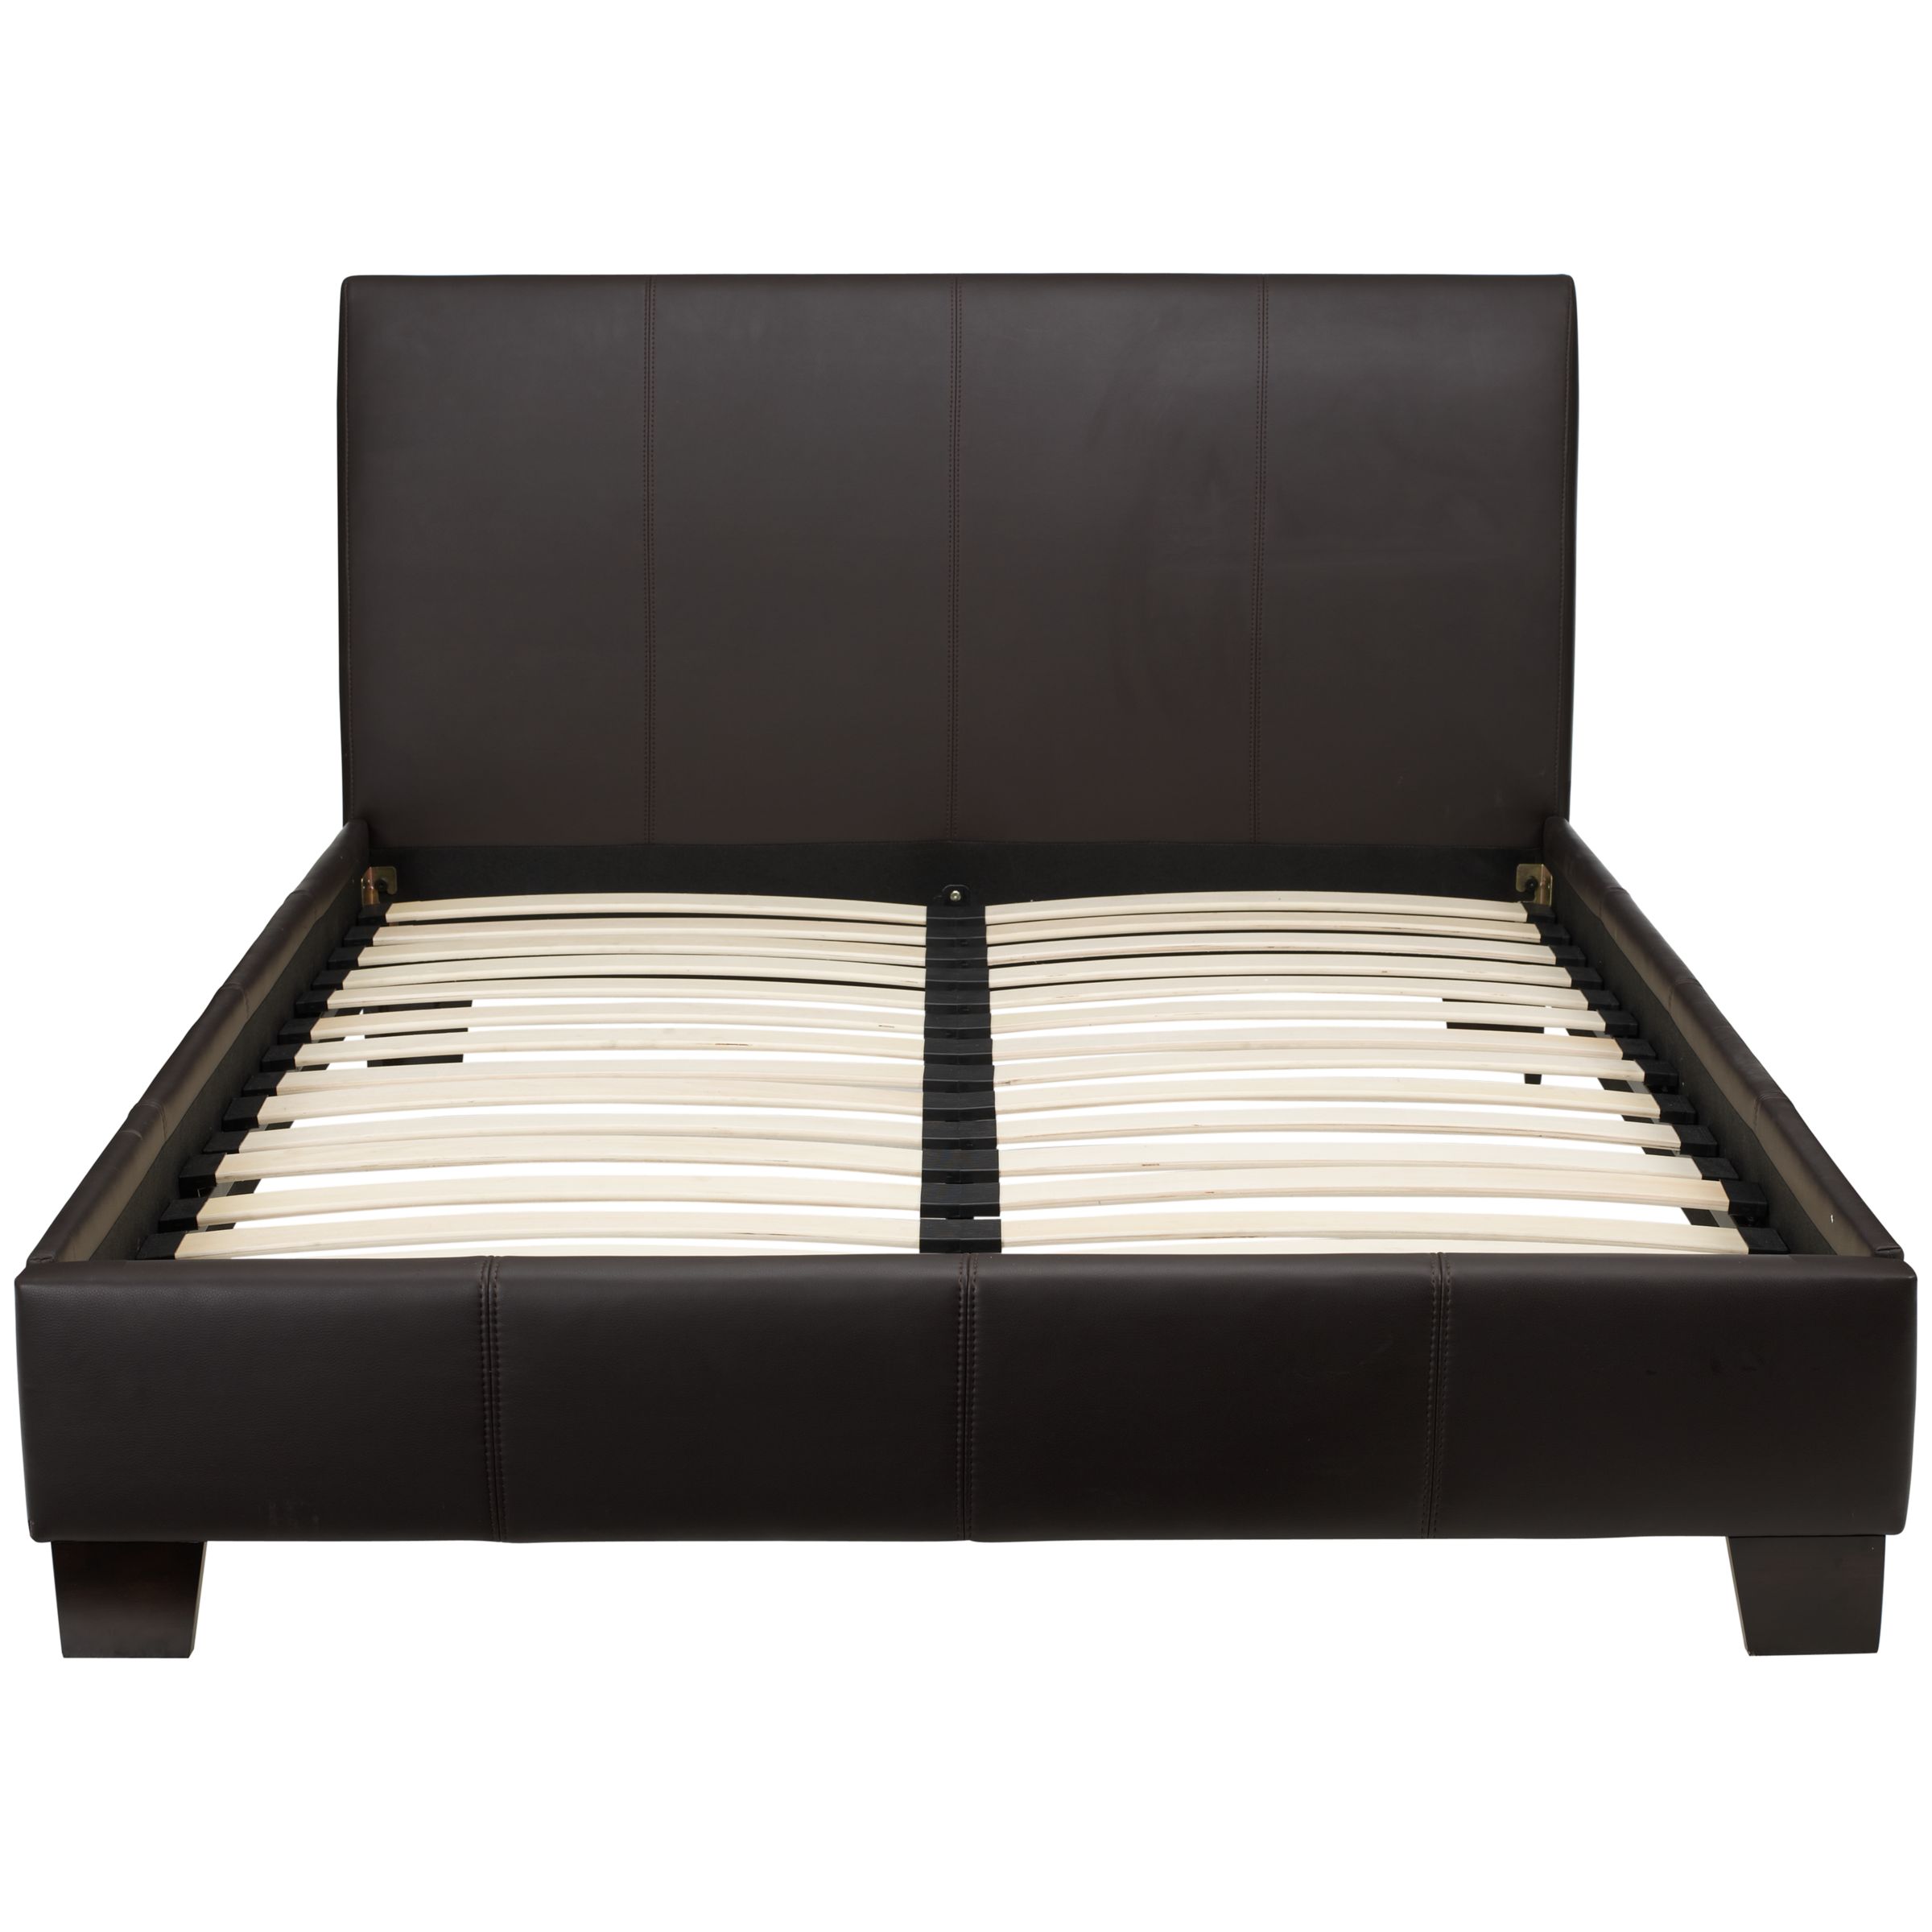 Stavely Bedstead, Brown, Double